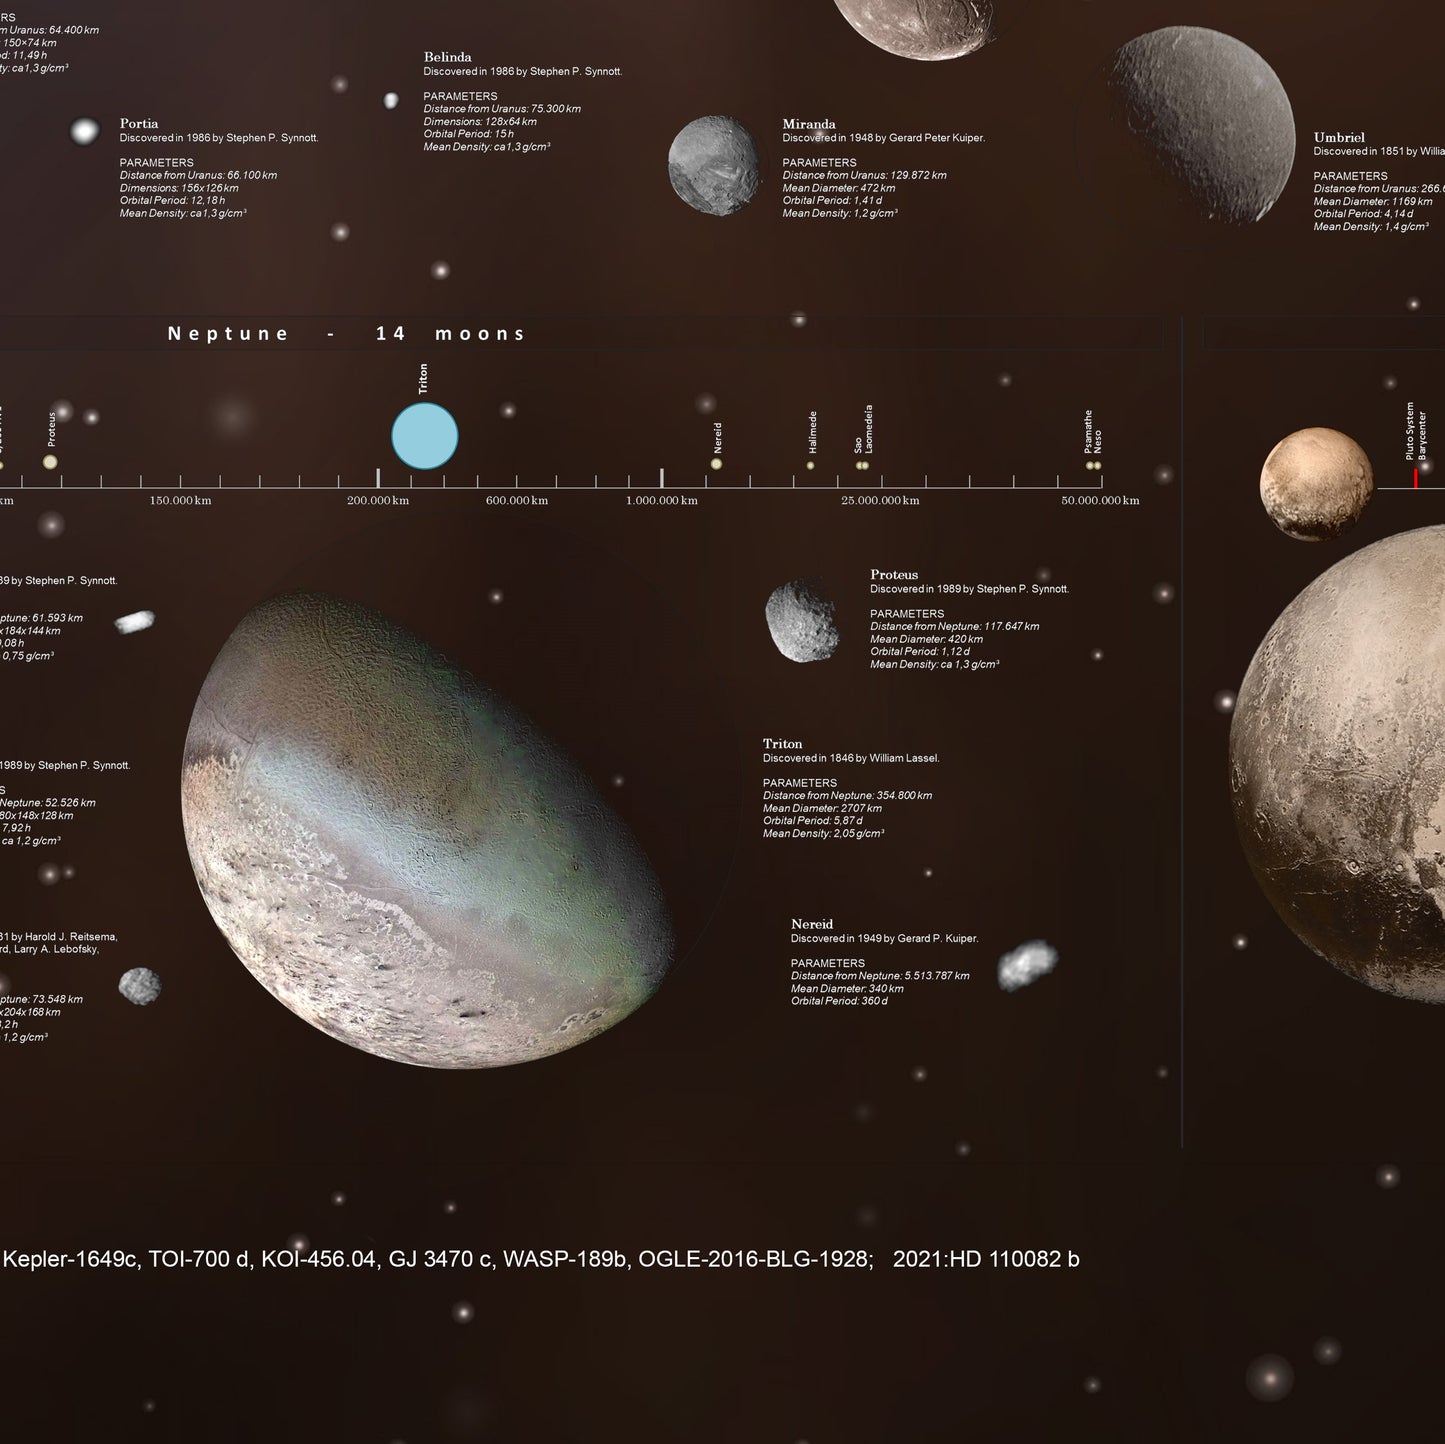 The Chart of The Minor Bodies Of The Solar System